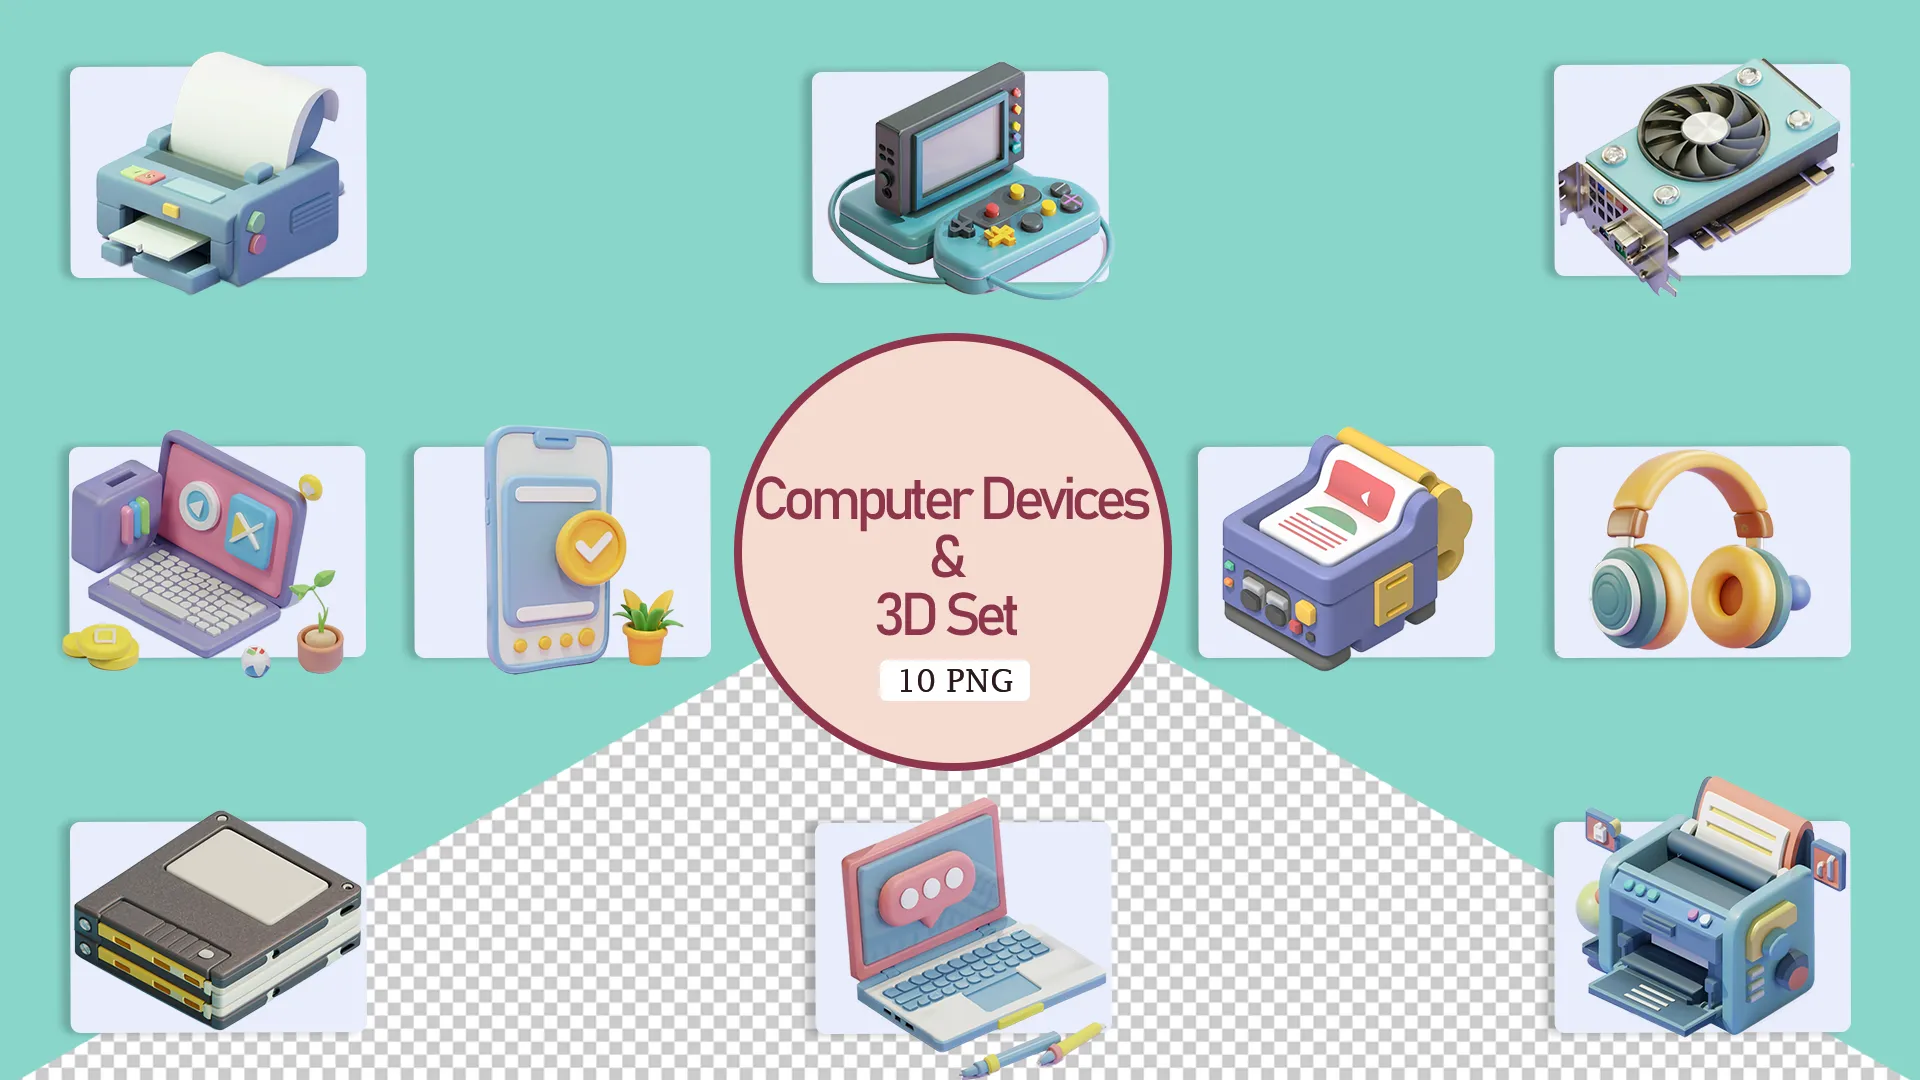 Creative 3D Computer Devices Pack image